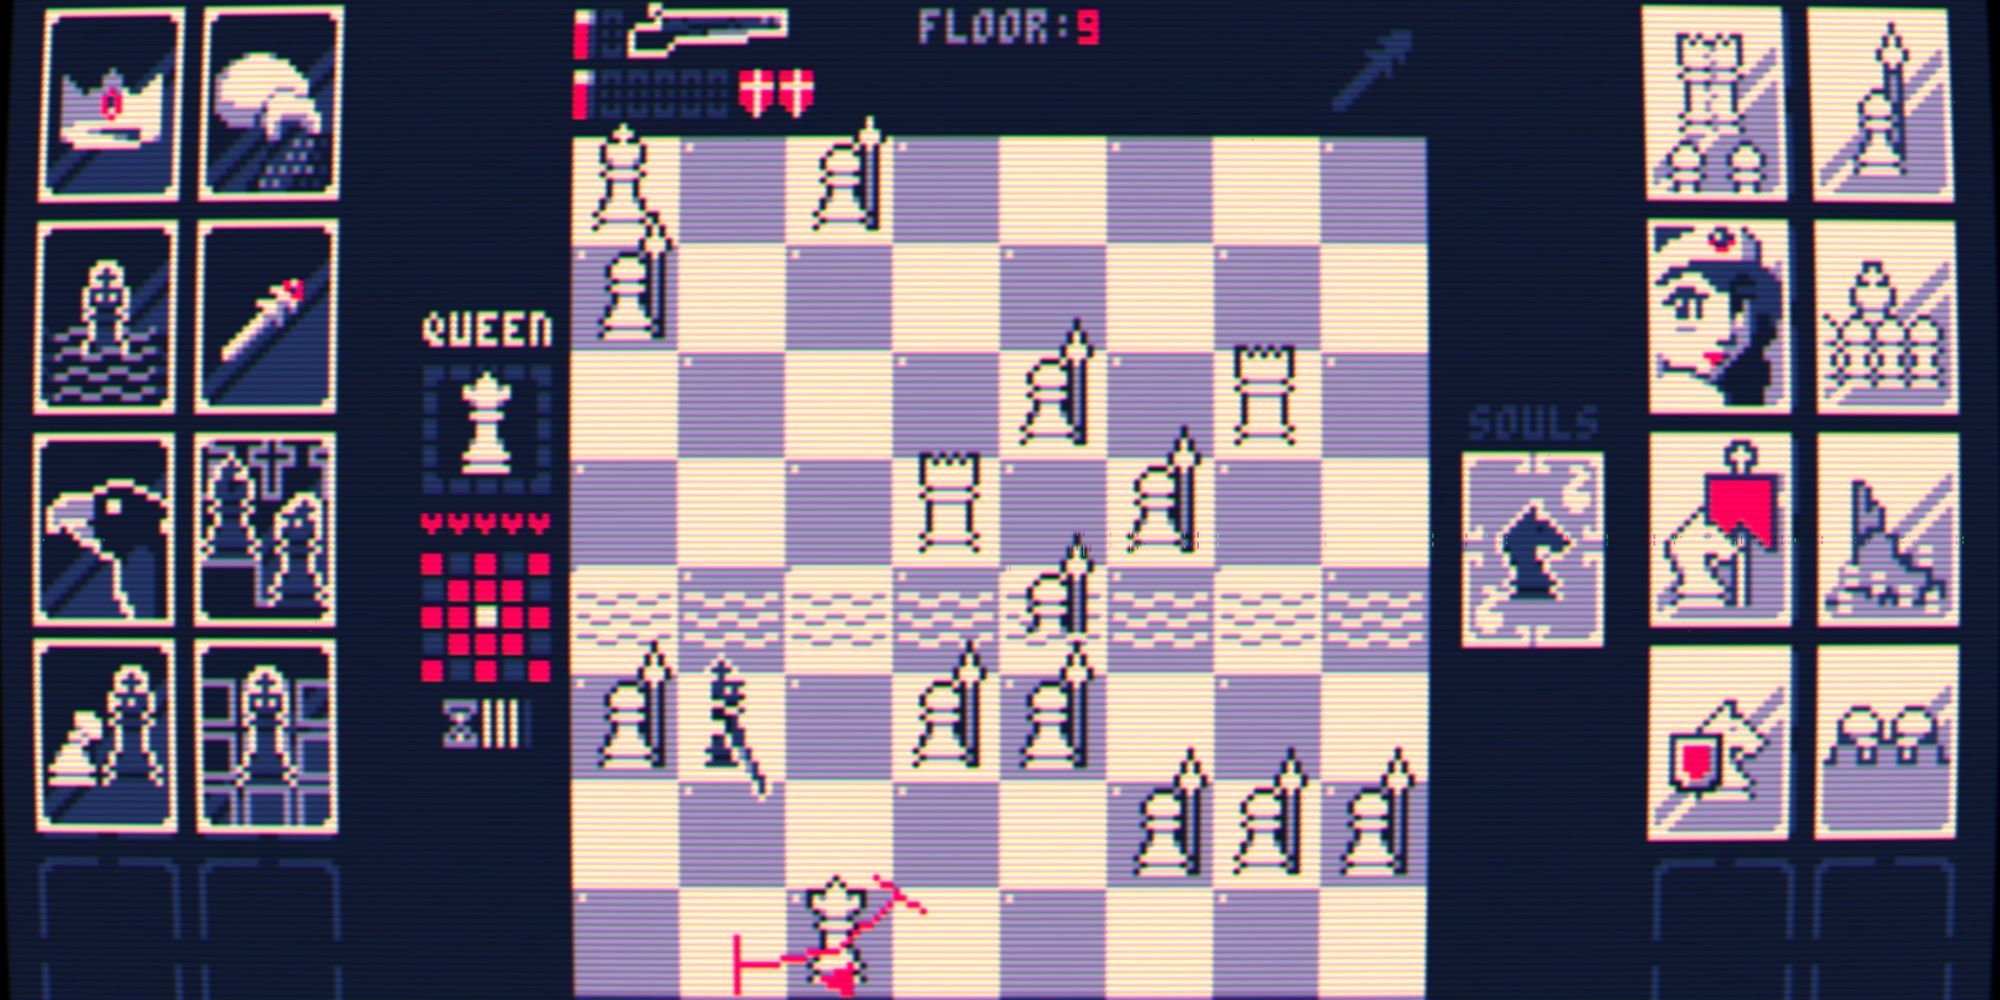 A player choosing their move in Shotgun King: The Final Checkmate